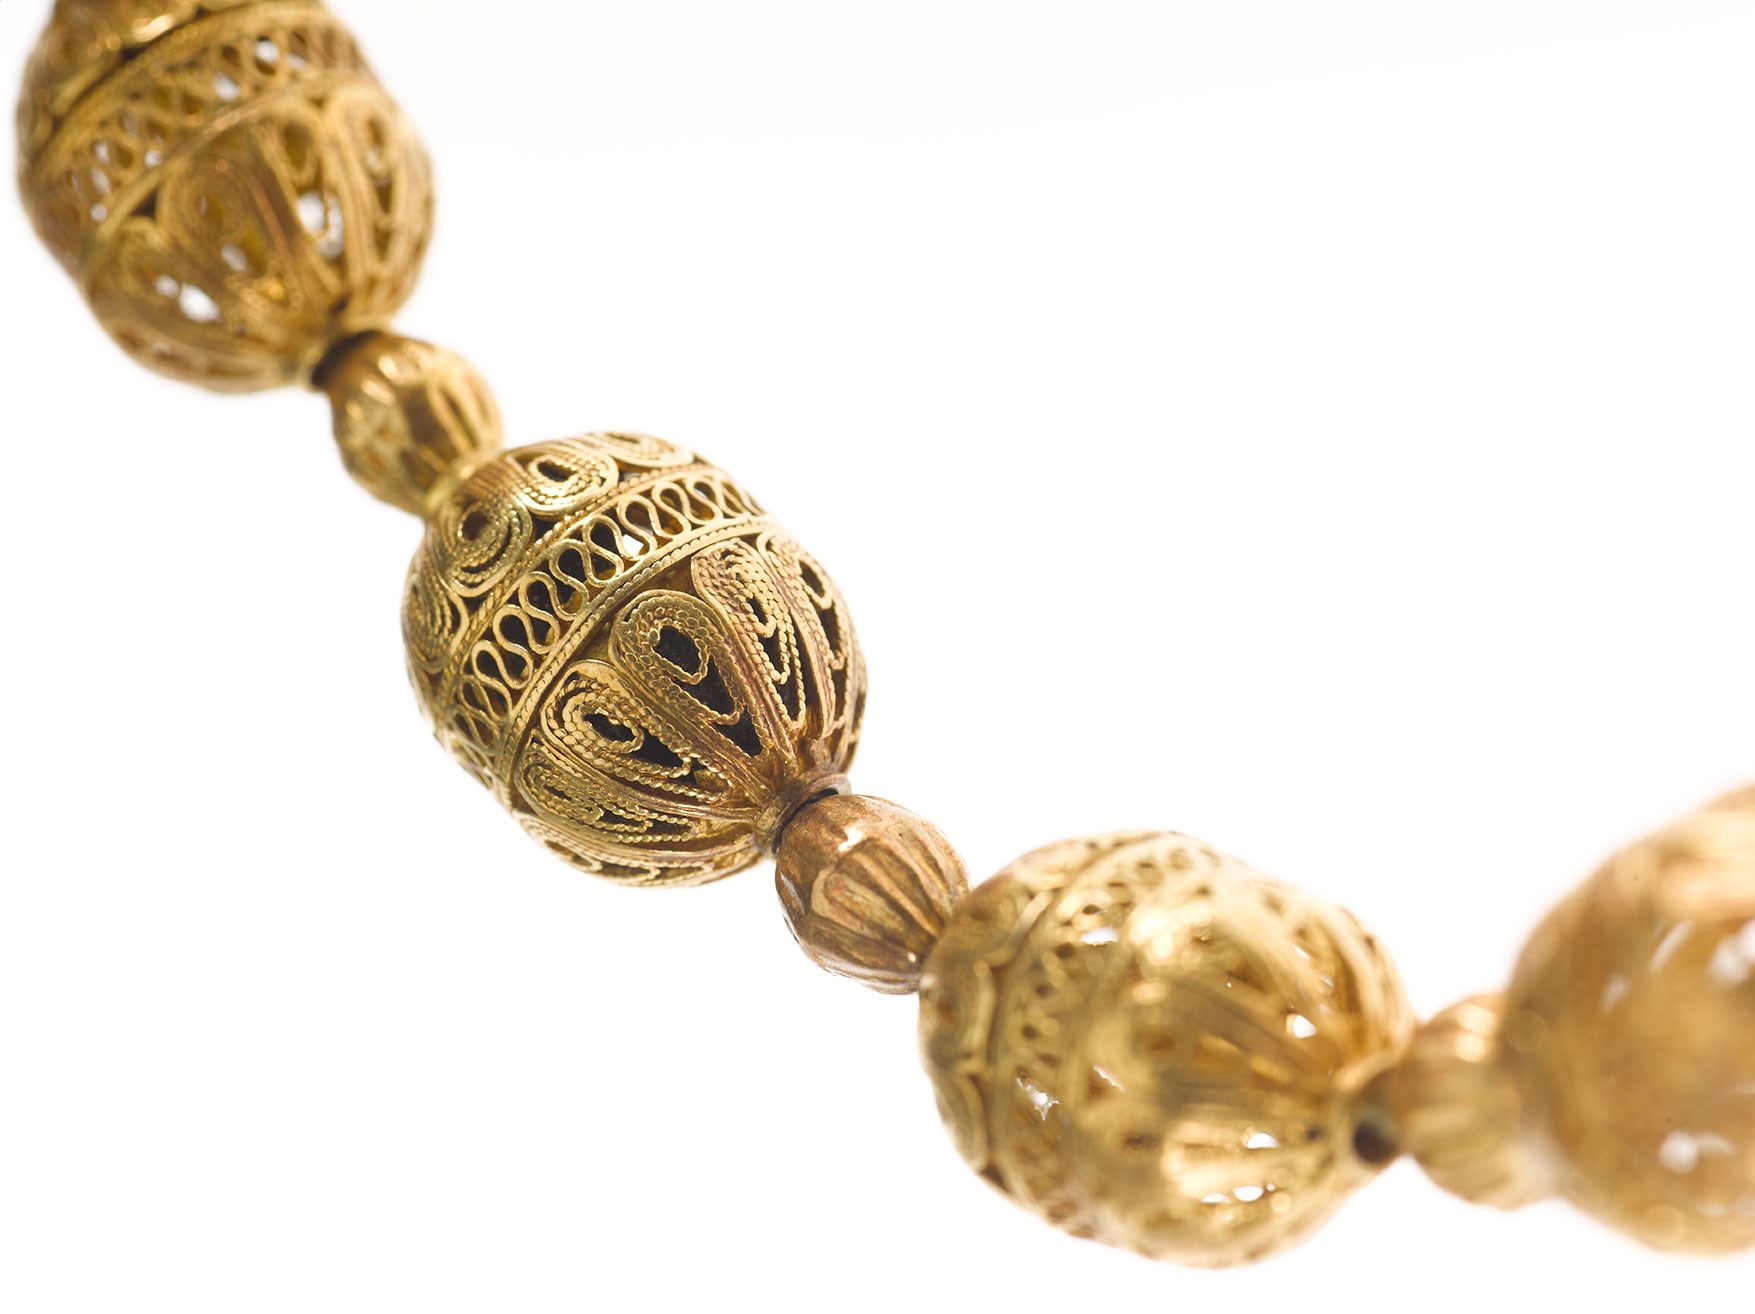 The Penicuik Jewels necklace which is said to have belonged to Mary, Queen of Scots.